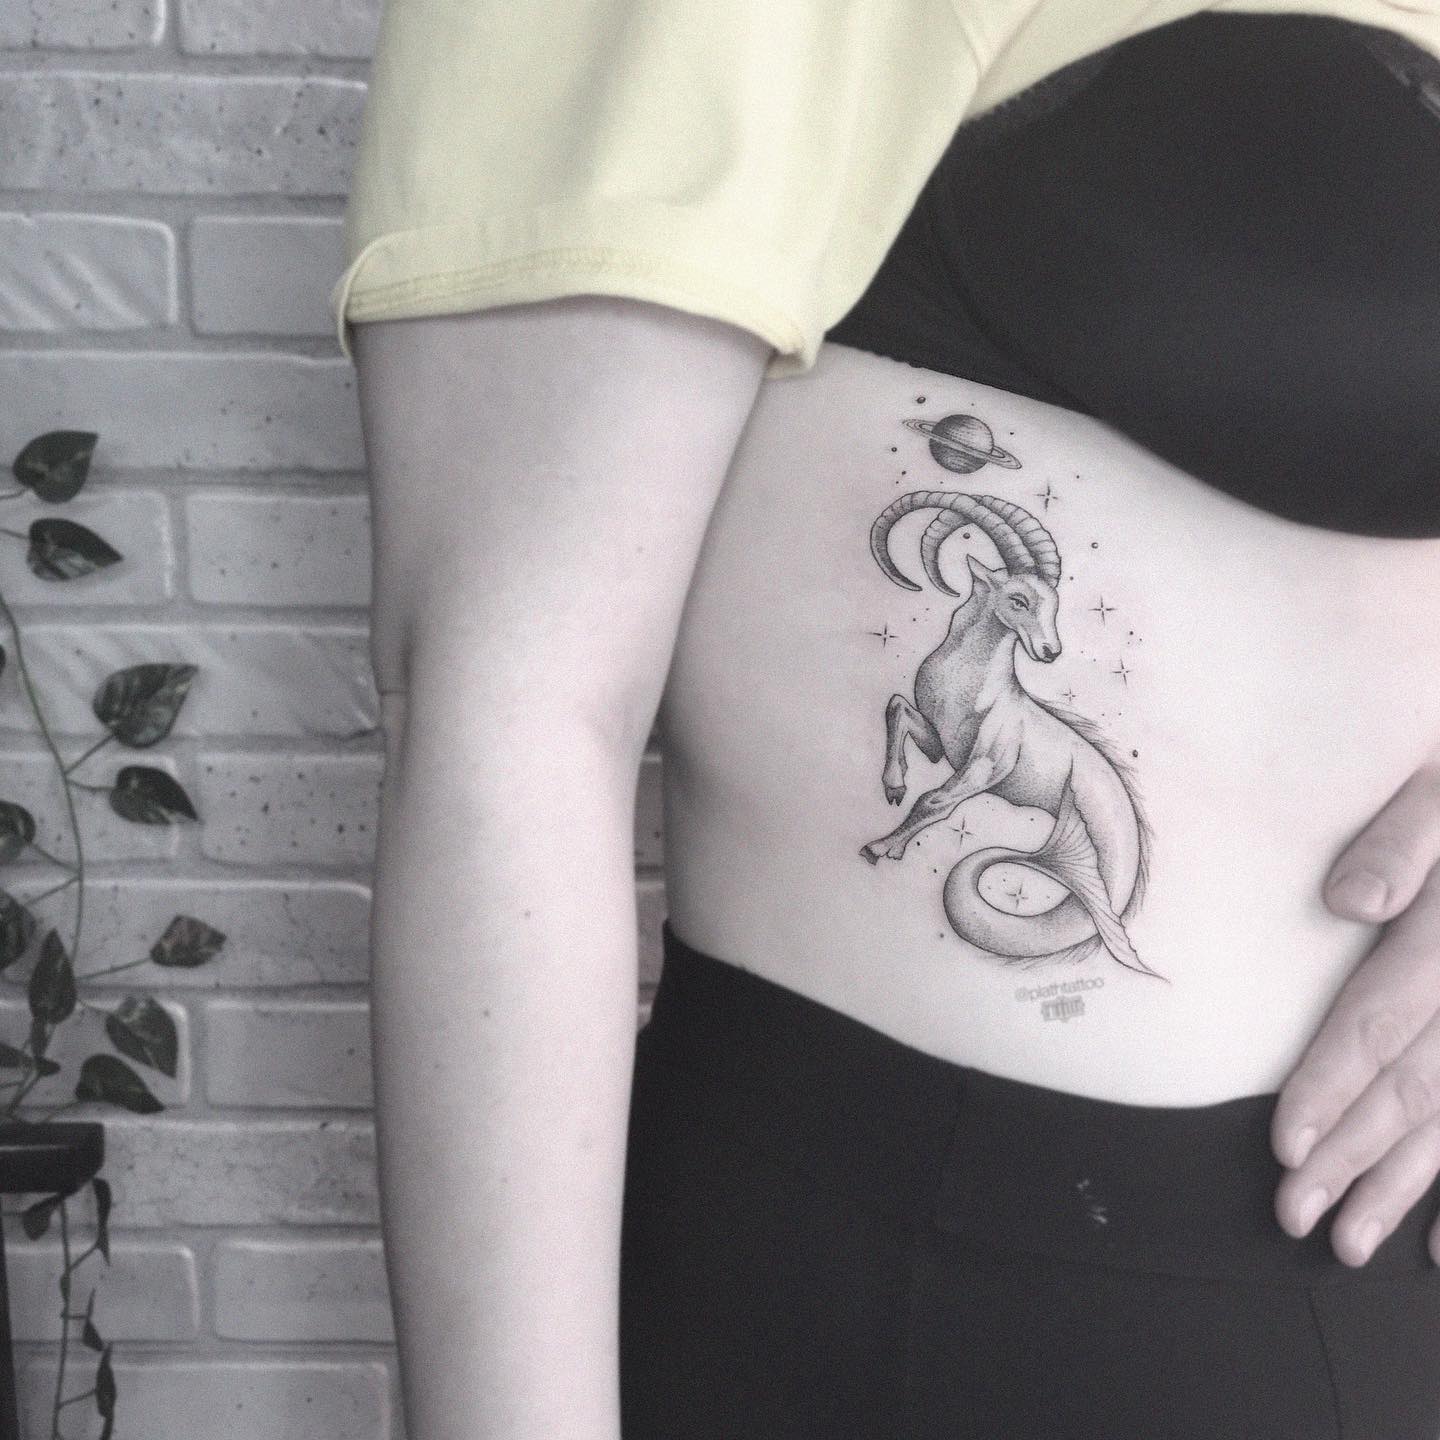 Sea goat and Saturn tattoo located on the rib